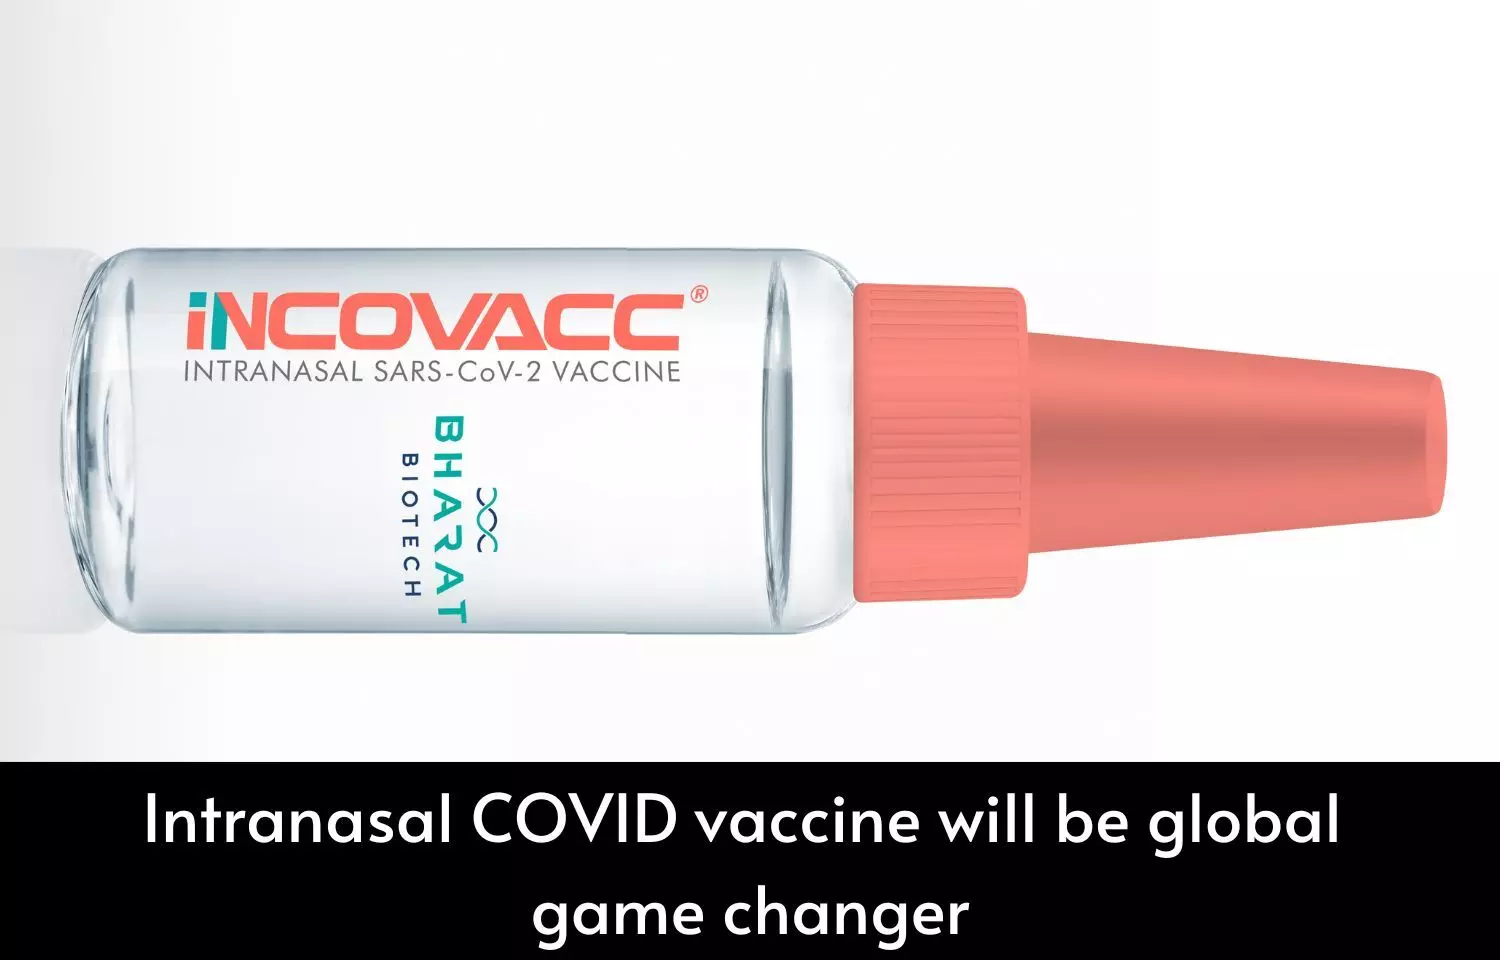 Intranasal COVID vaccine INCOVACC will be global game changer, says Bharat Biotech Chairman